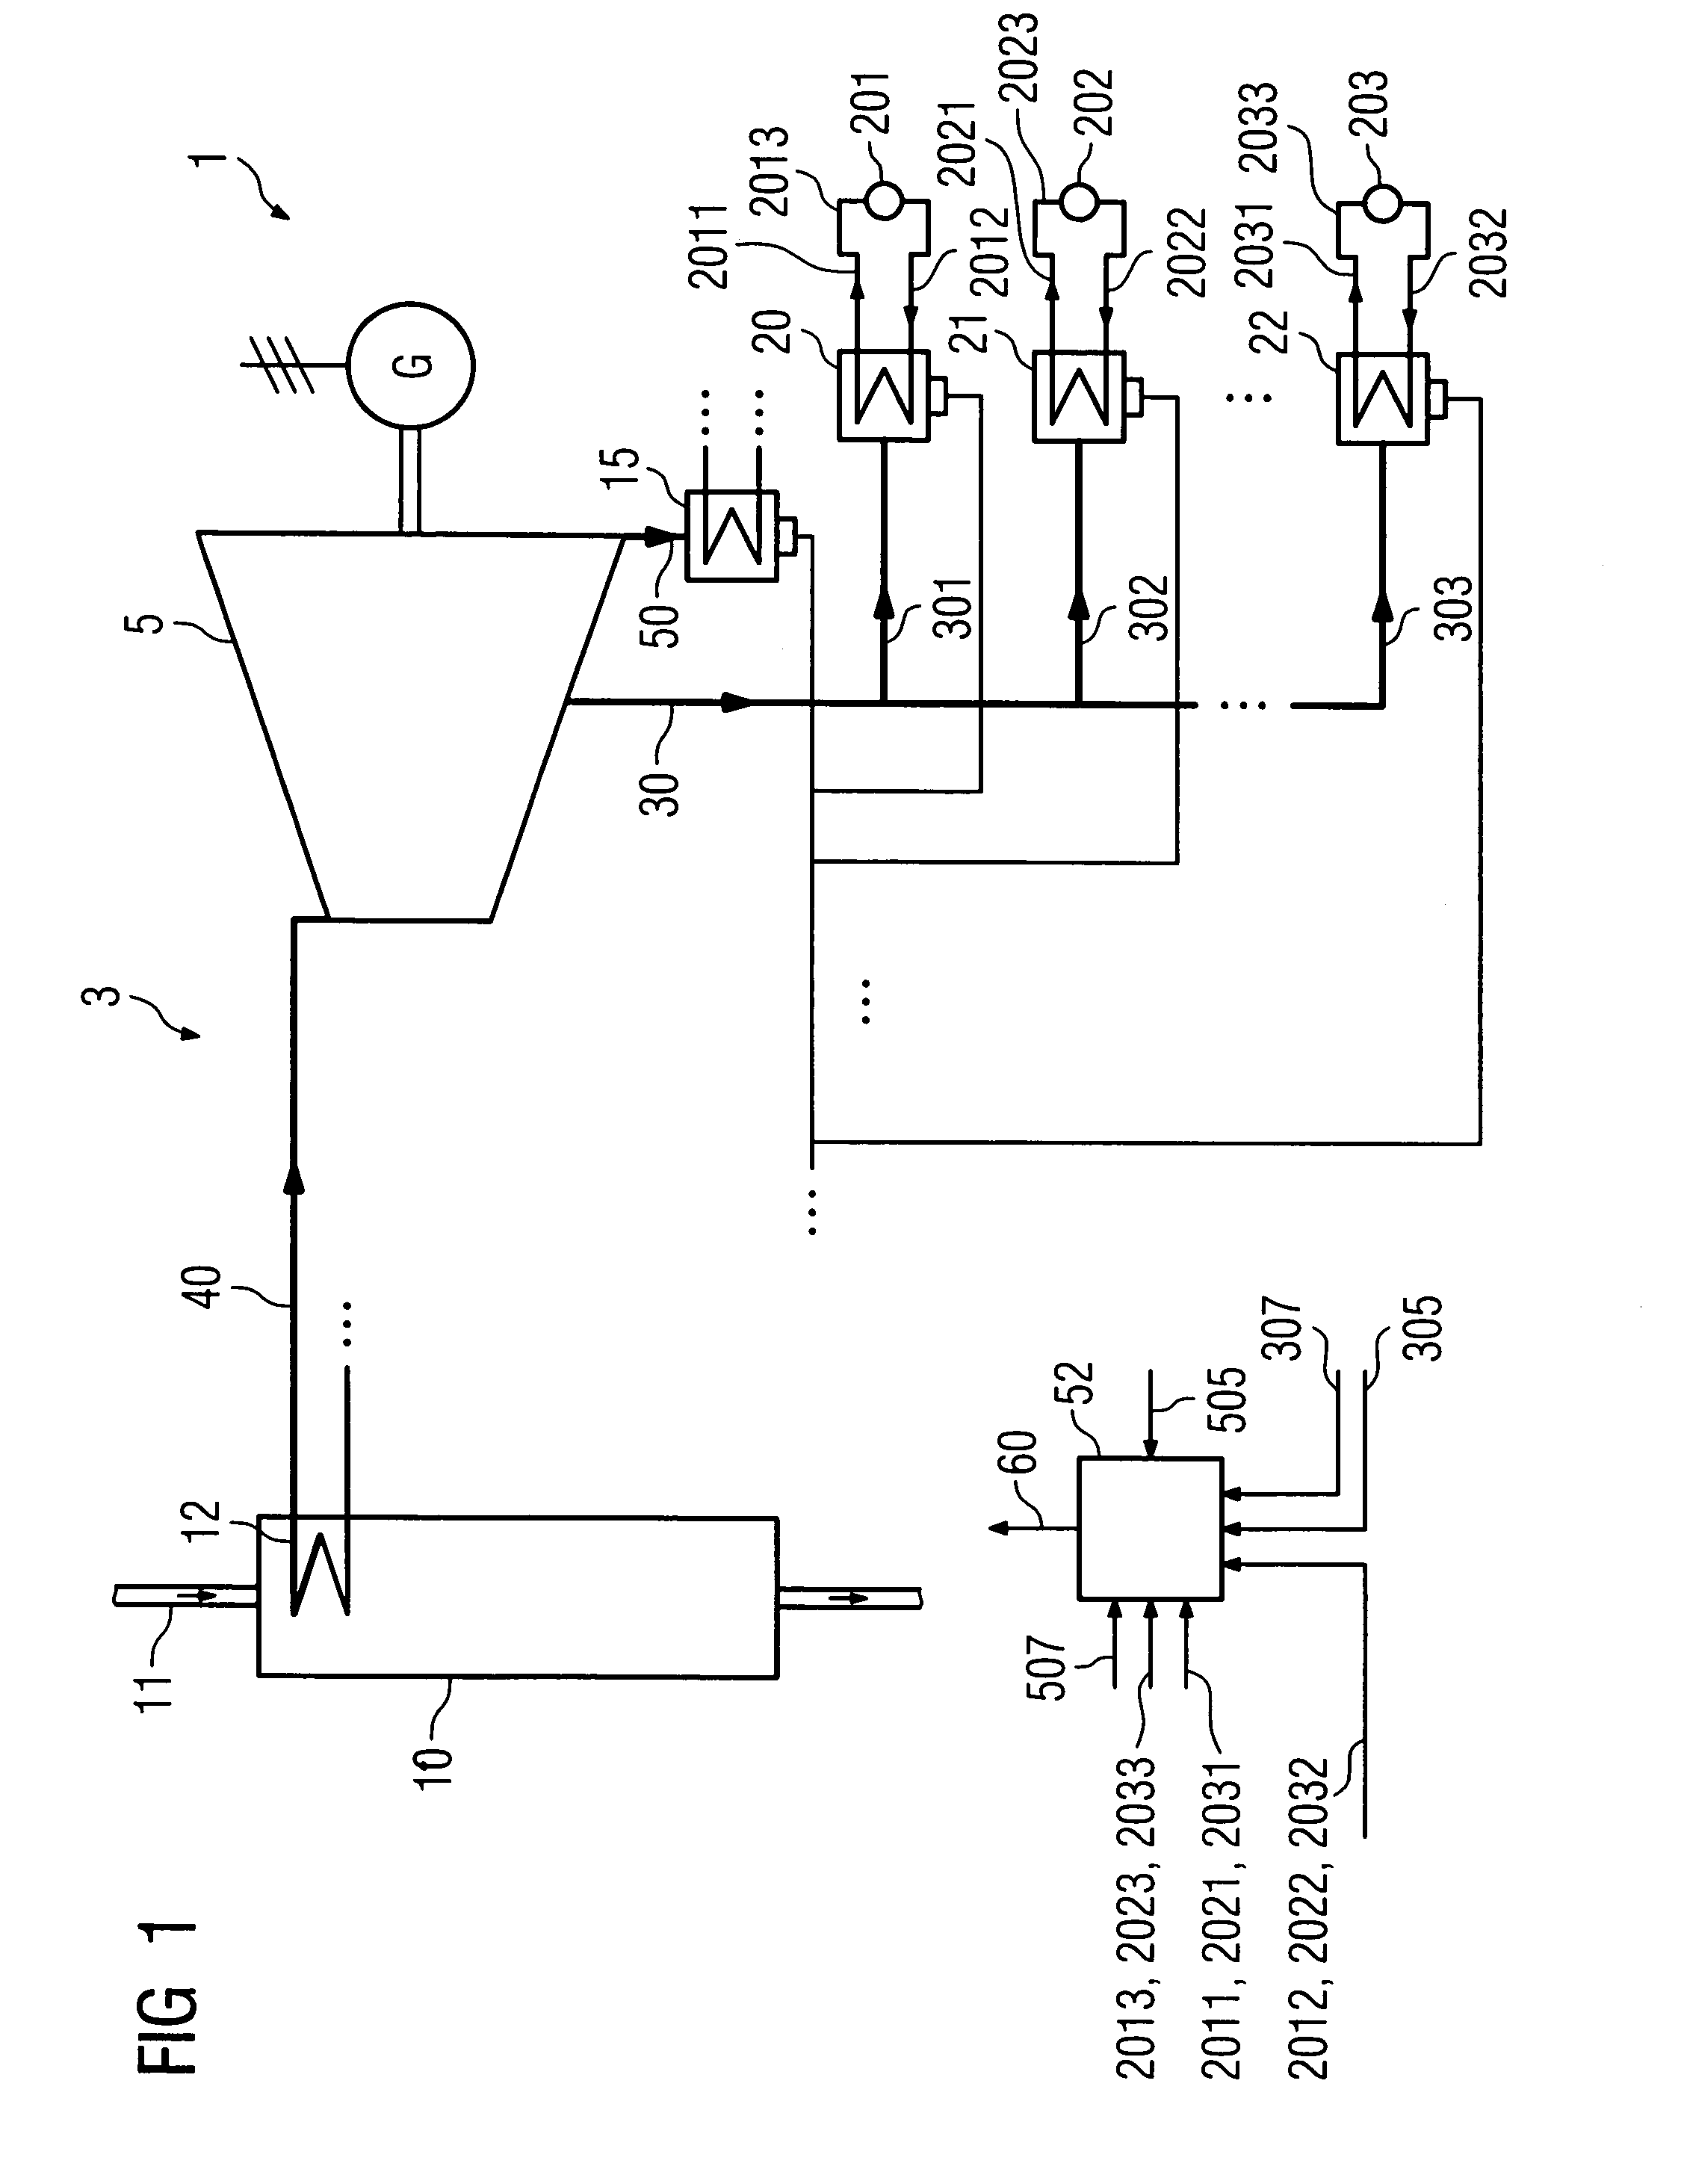 Method and device for regulating the power output of a combined-cycle power station